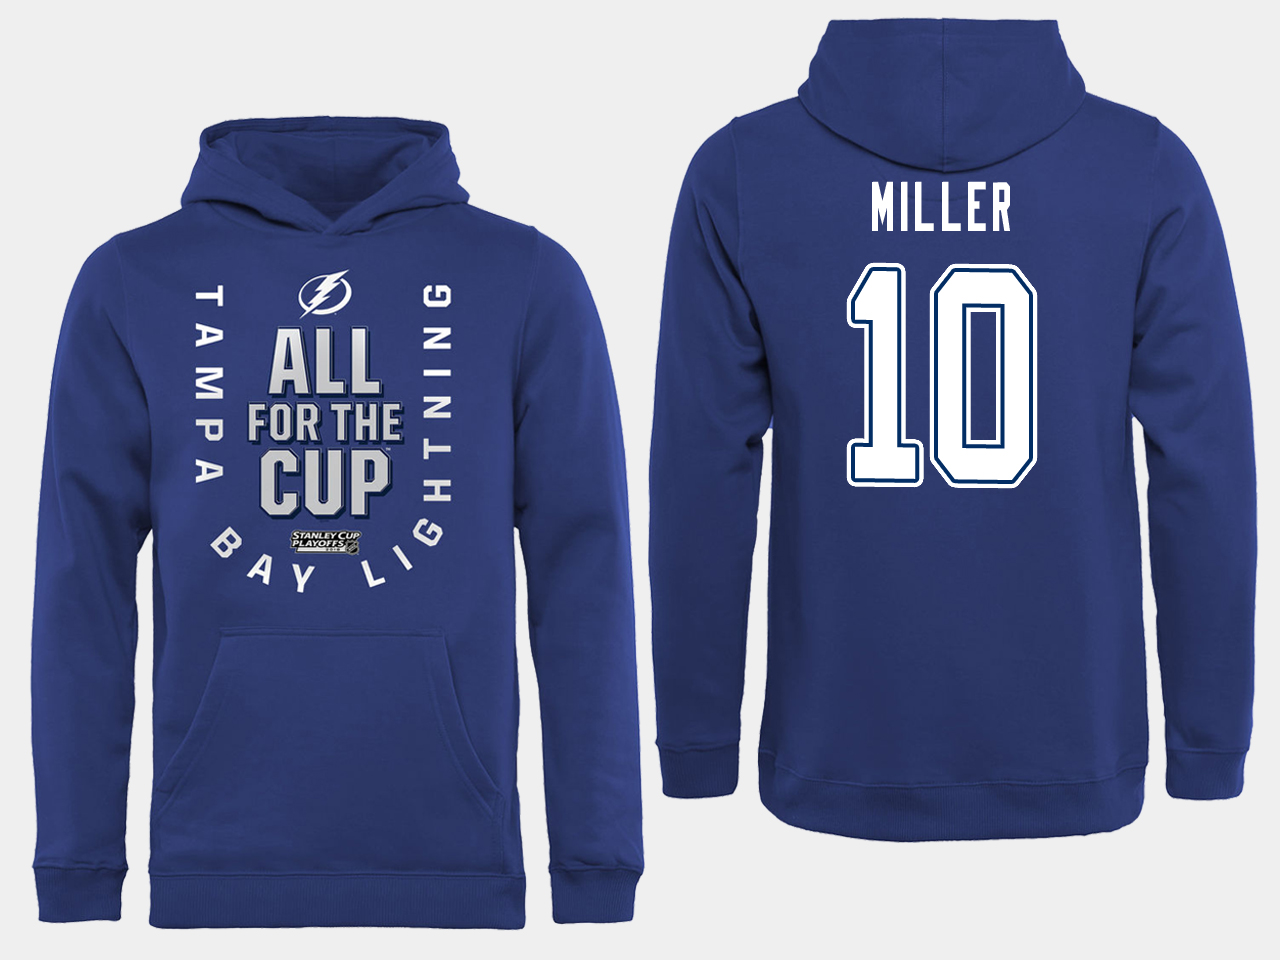 NHL Men adidas Tampa Bay Lightning #10 Miller blue All for the Cup Hoodie